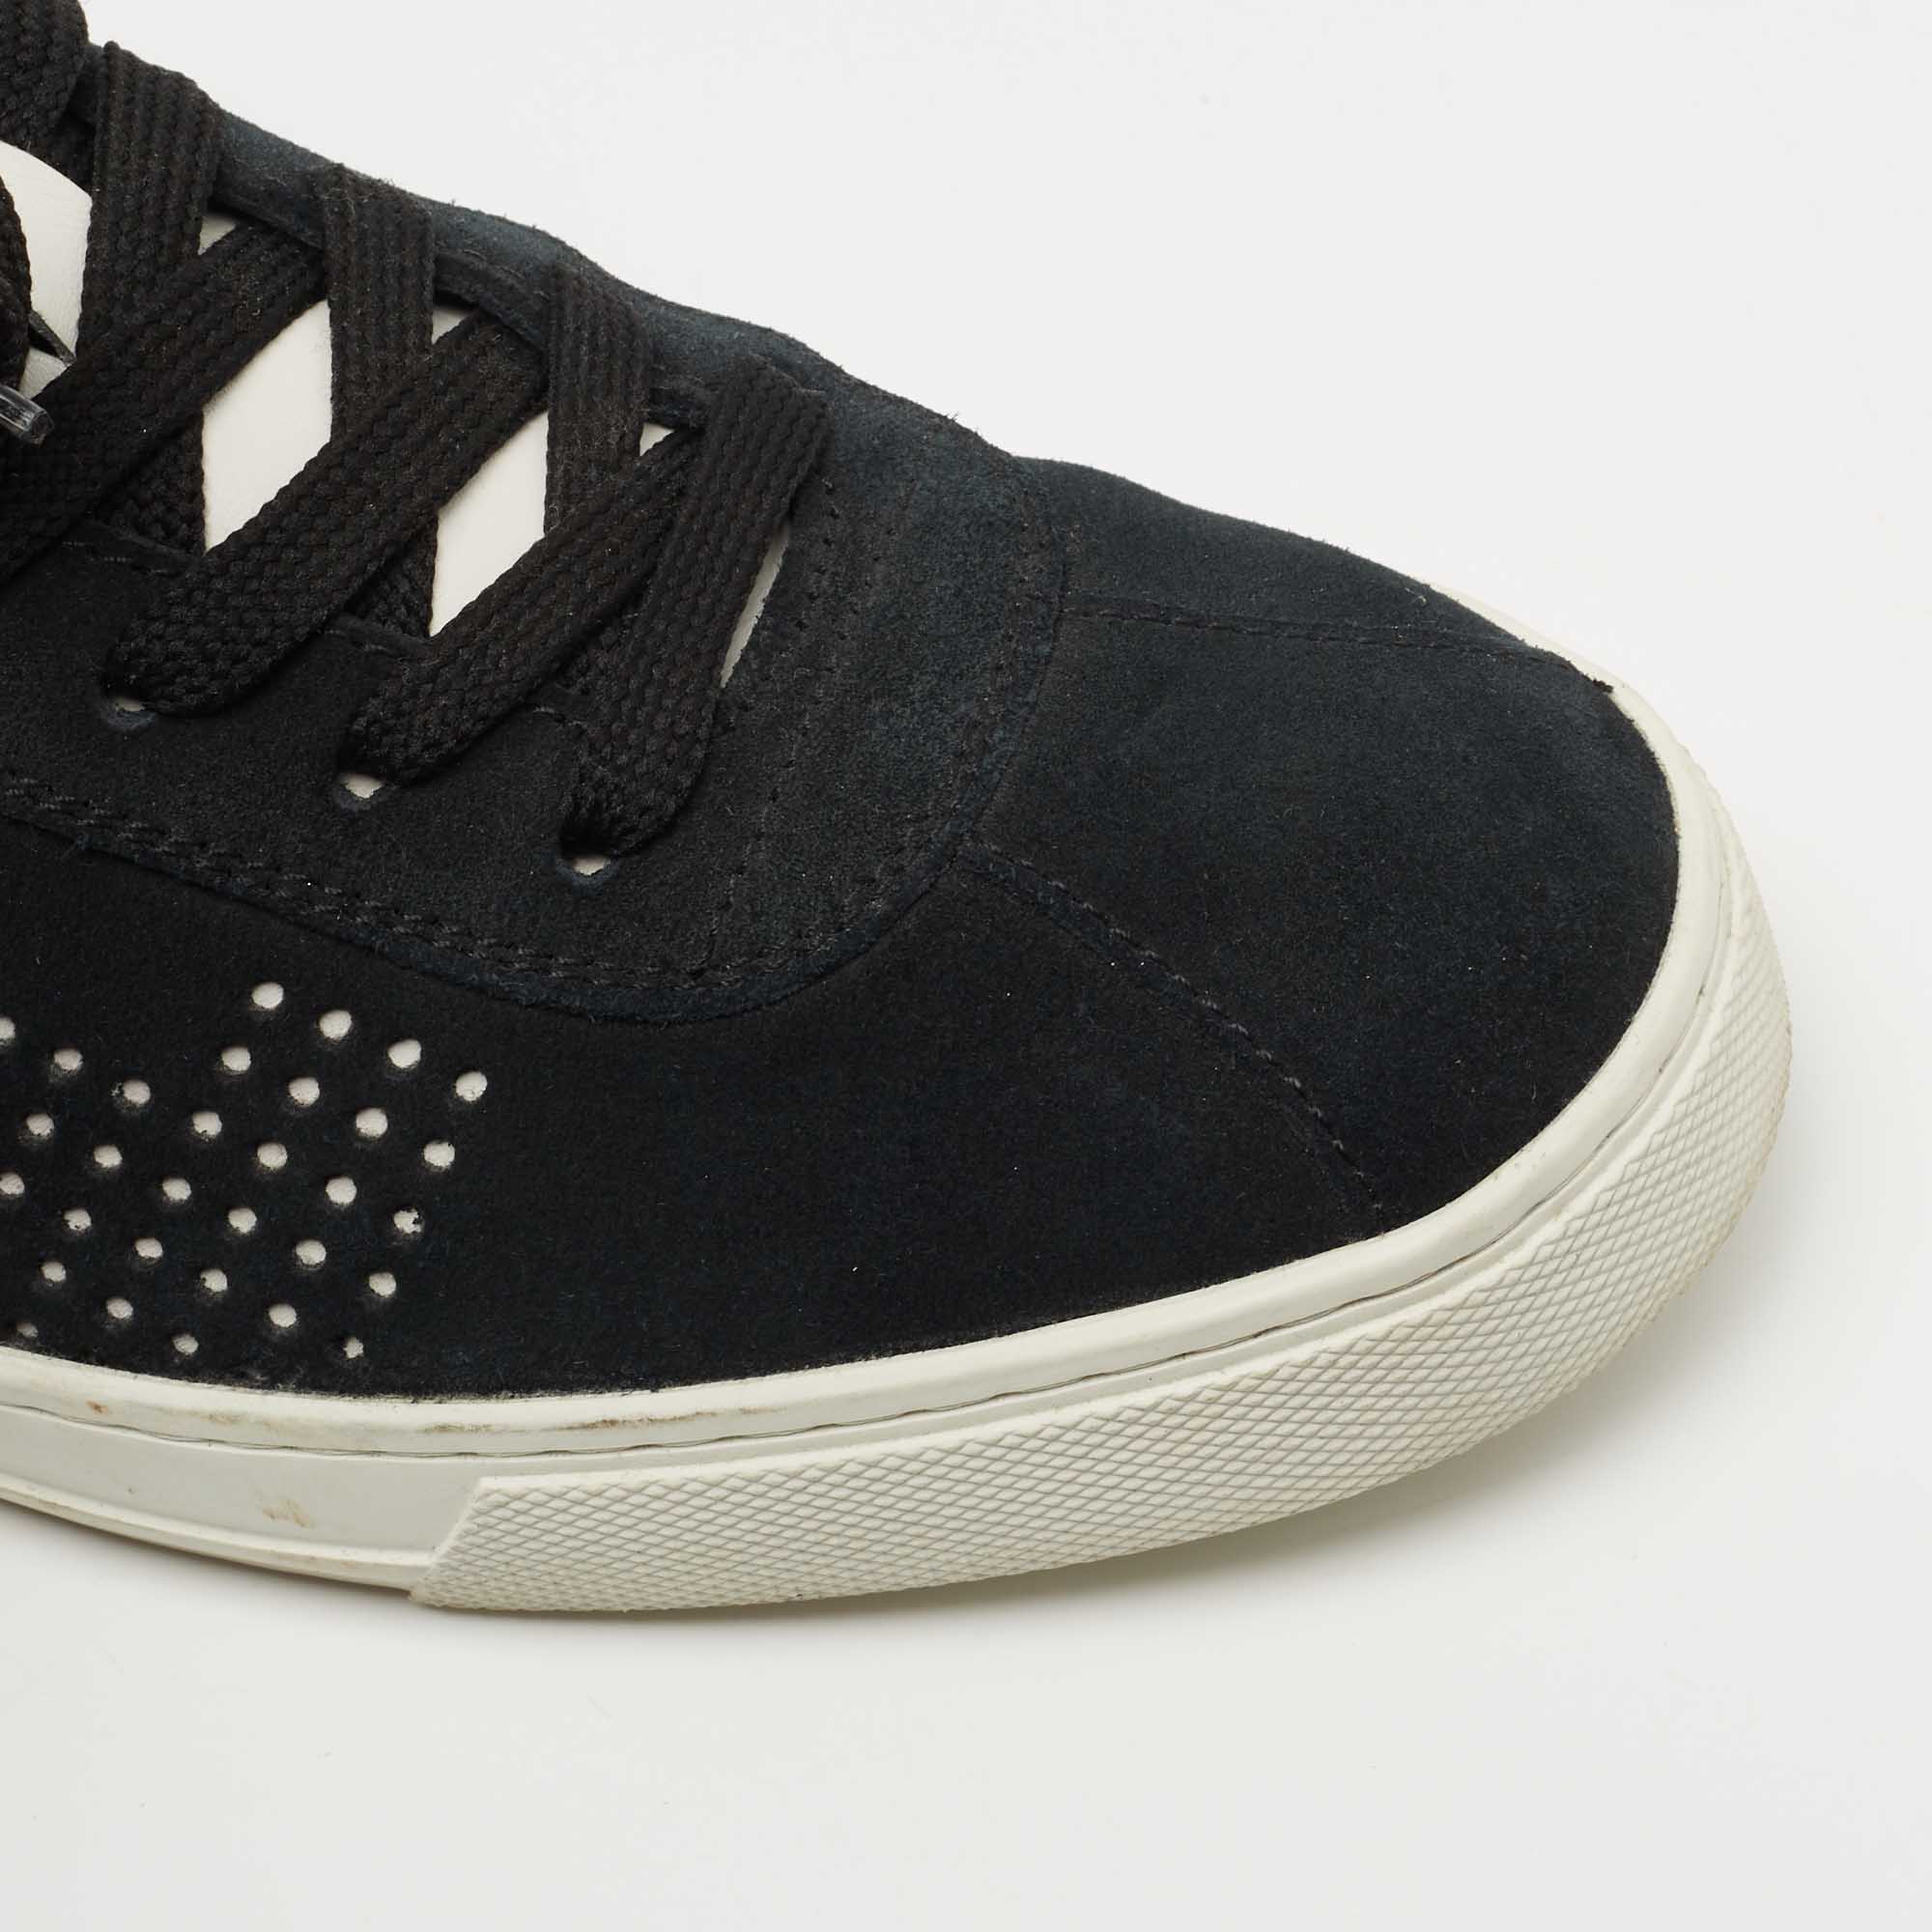 Tods Navy Blue/White Suede And Leather Low Top Sneakers Size 41.5